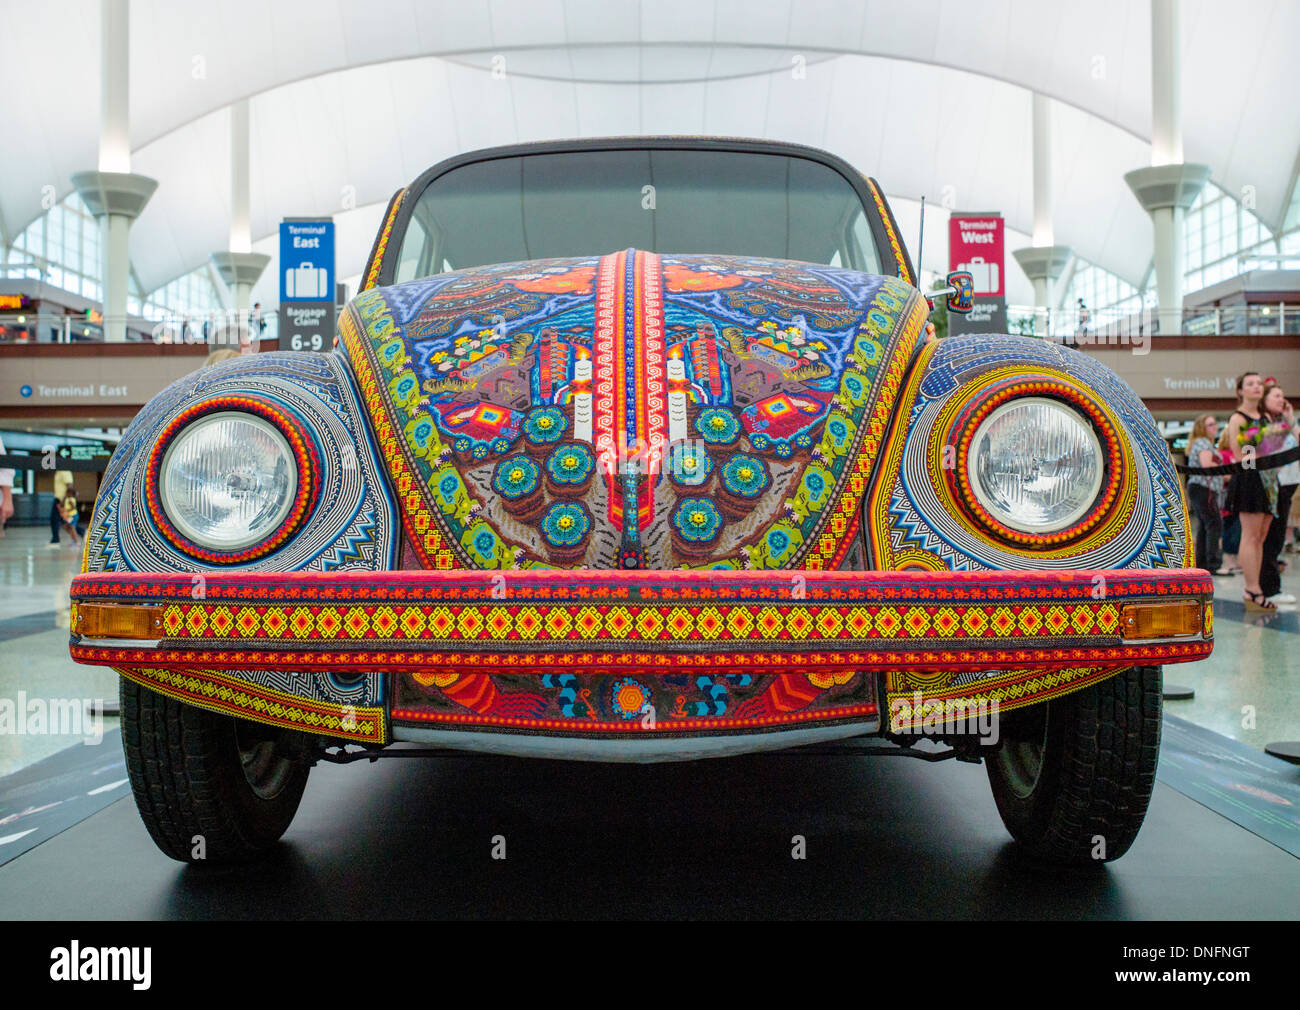 Vochol, Volkswagon Beetle, decorated by Huichol people of Mexico, with yarn paintings and beadwork, Denver International Airport Stock Photo